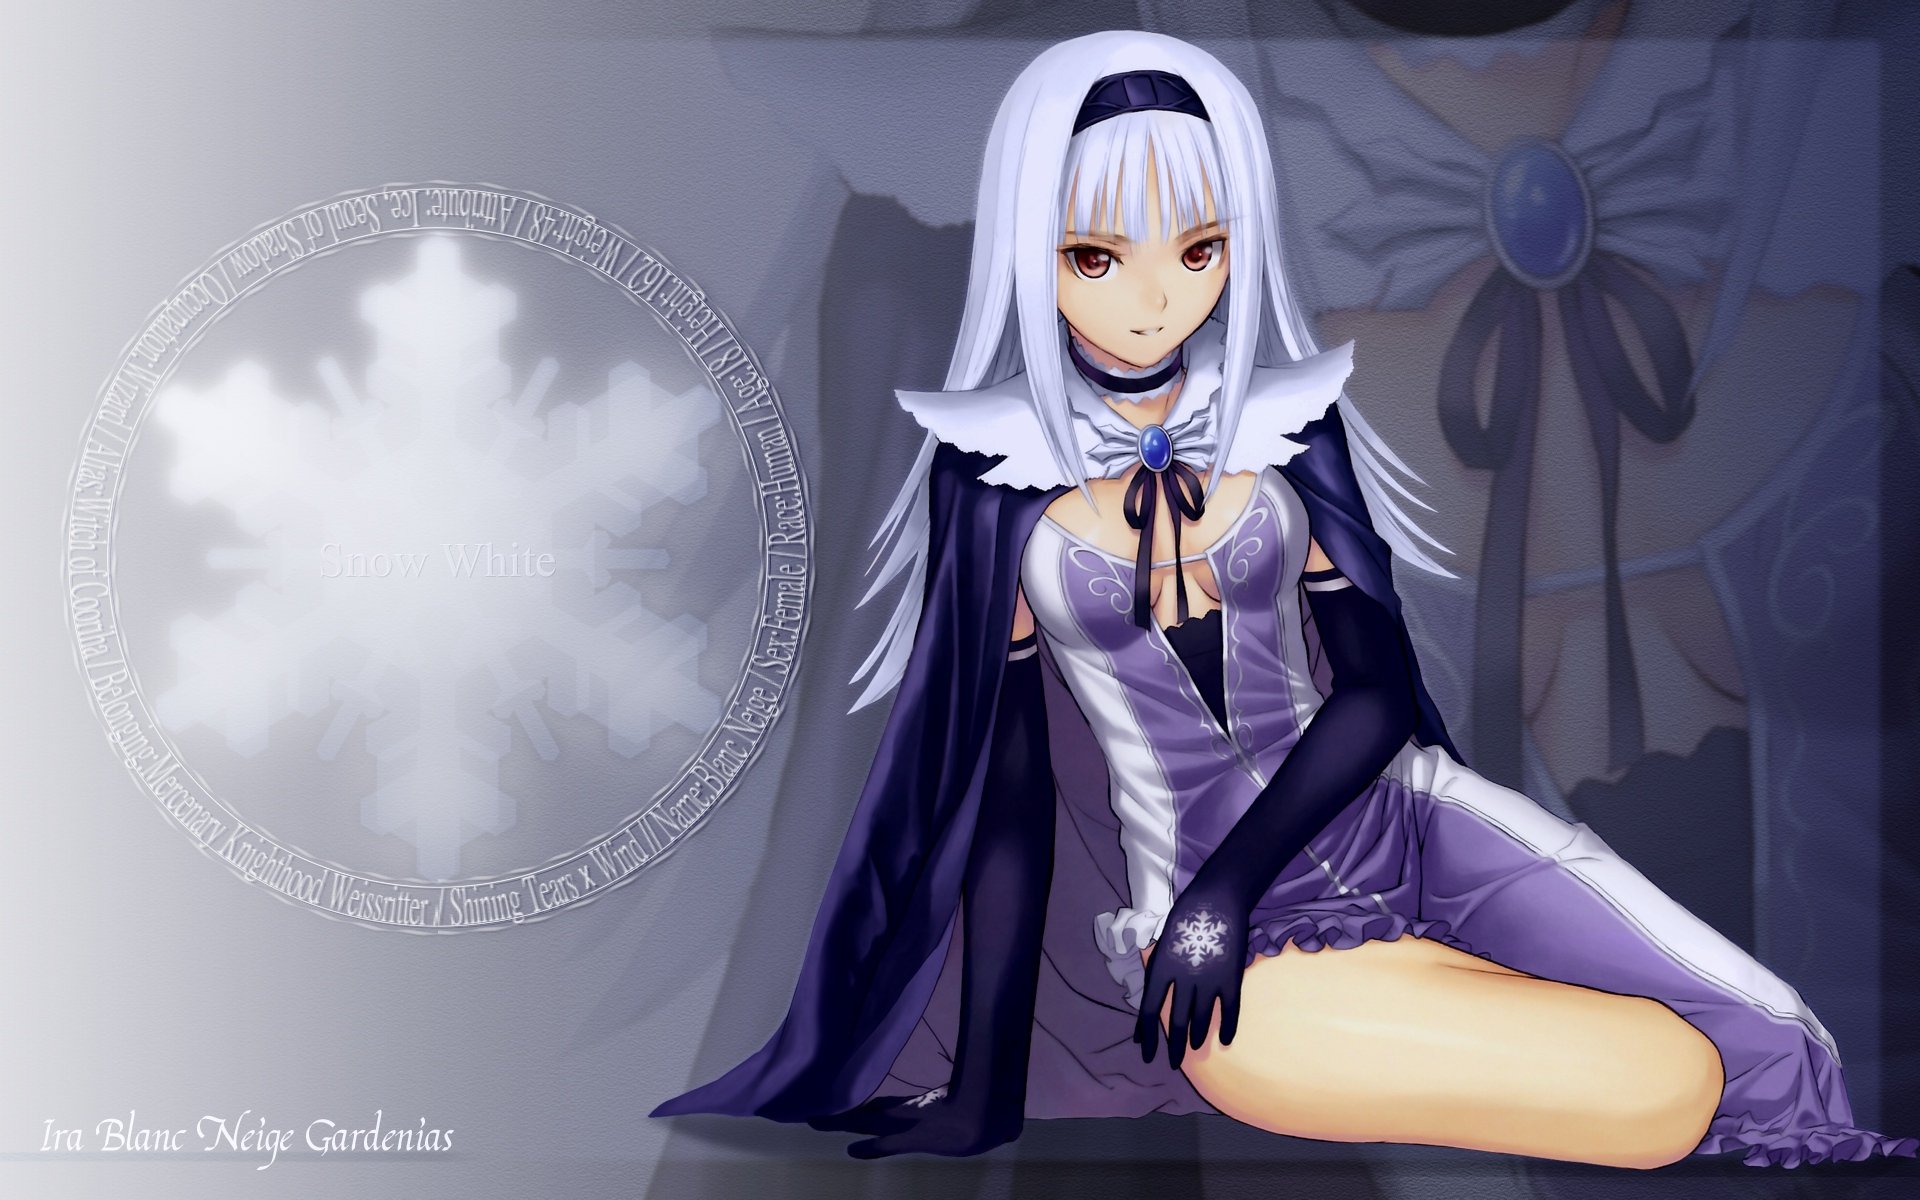 Fate/stay night Anime Witchcraft Drawing, cute witch, manga